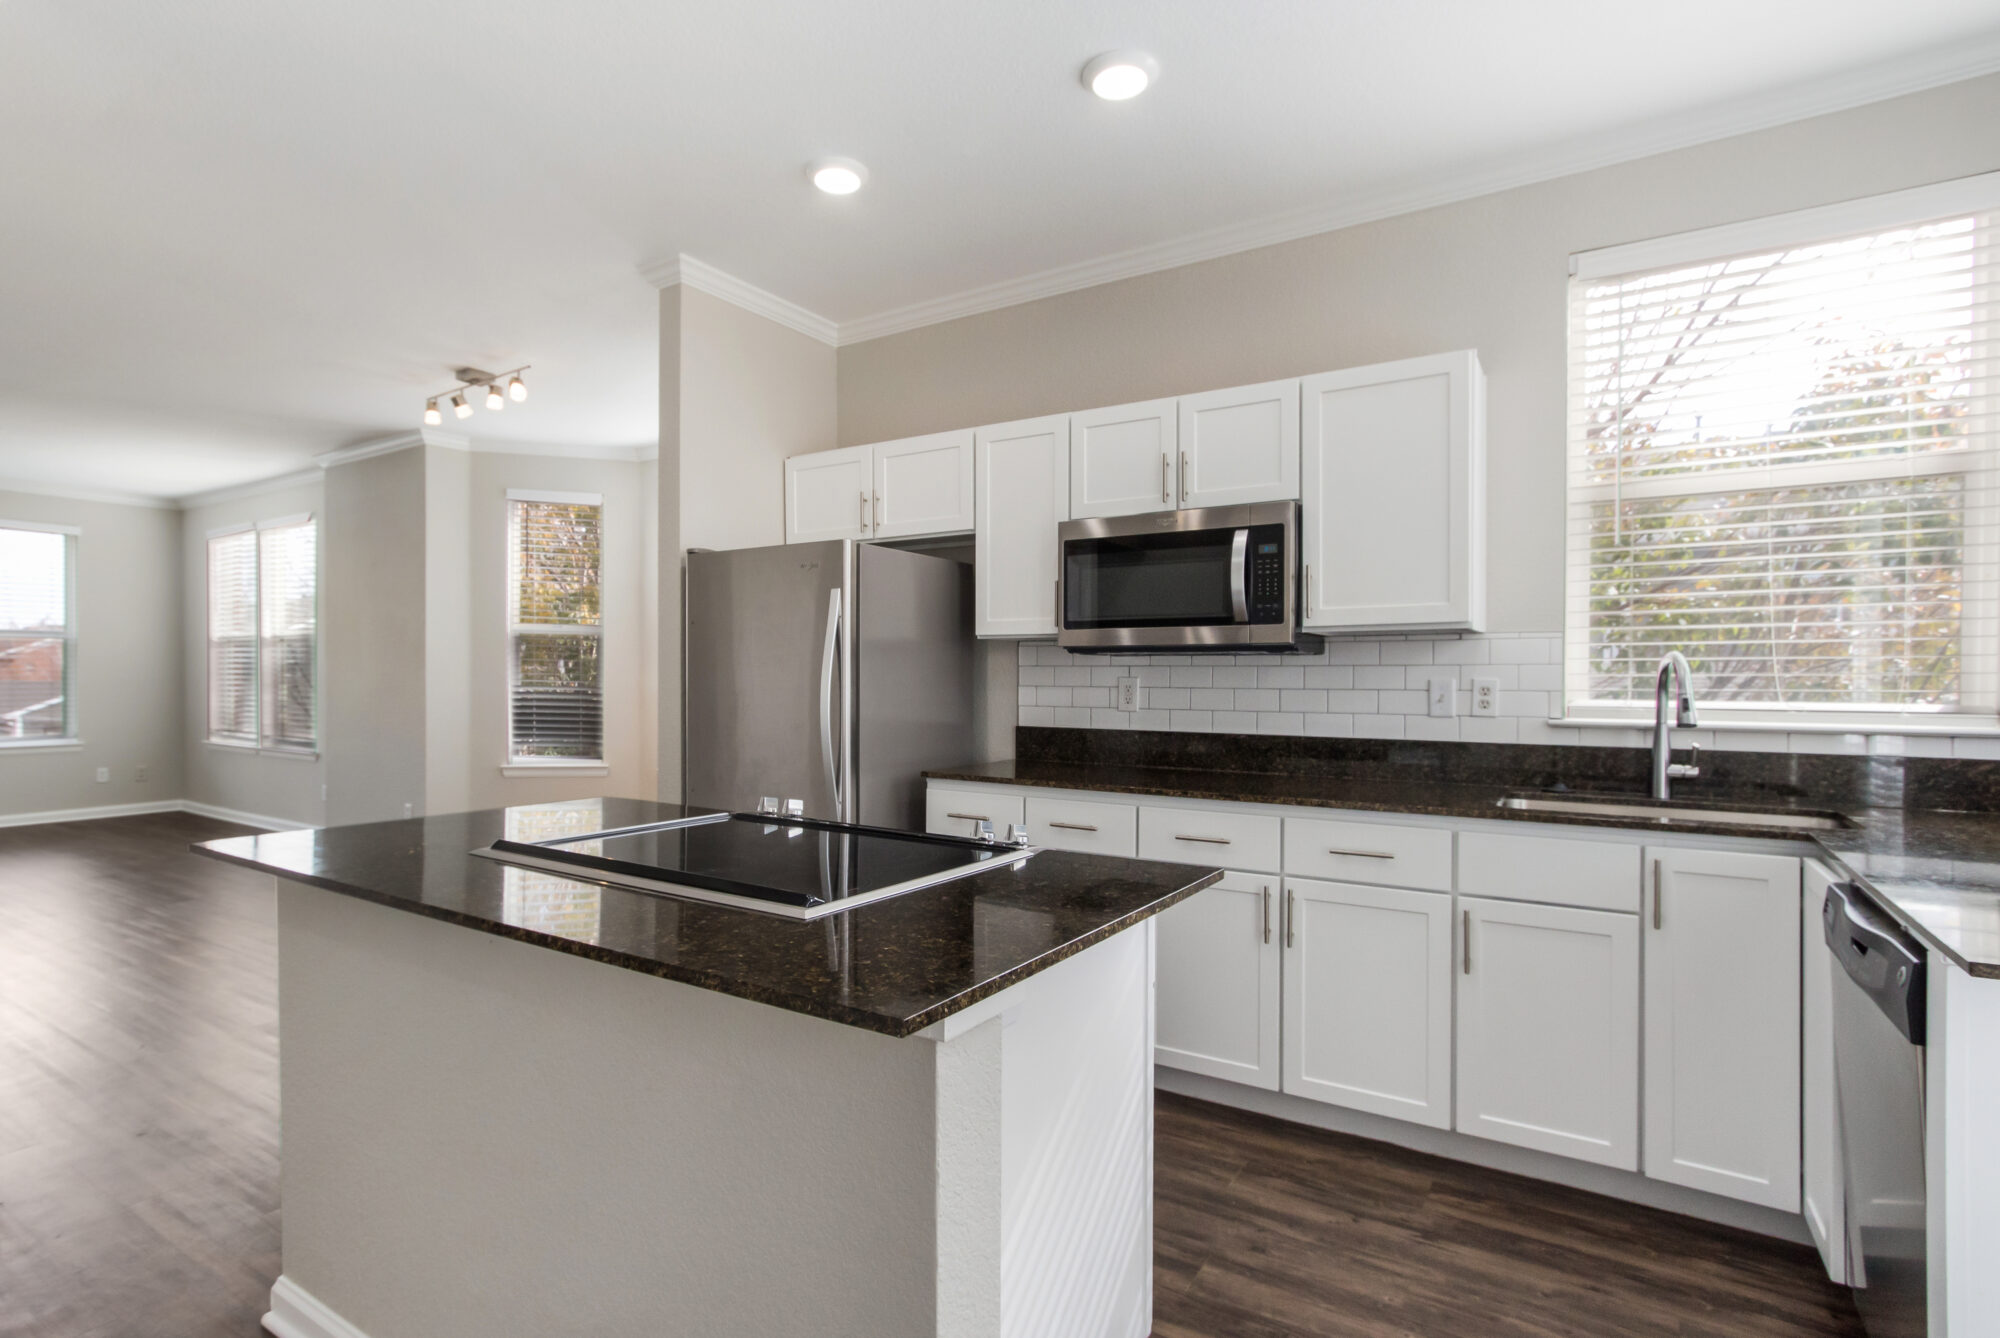 Kitchen with stainless steel appliances, granite counter tops, and tile backsplash